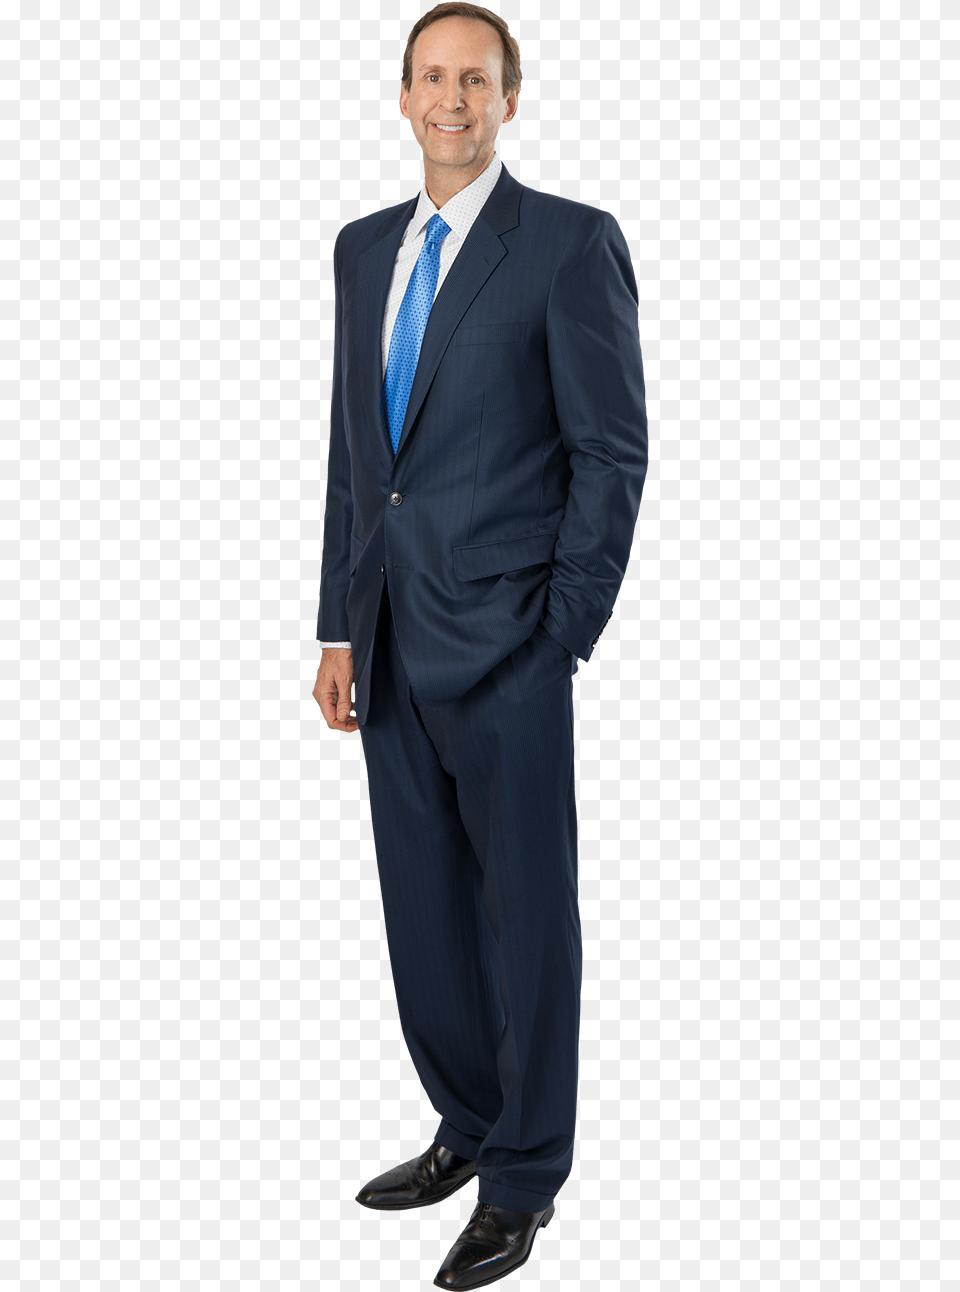 Tuxedo, Suit, Clothing, Formal Wear, Tie Png